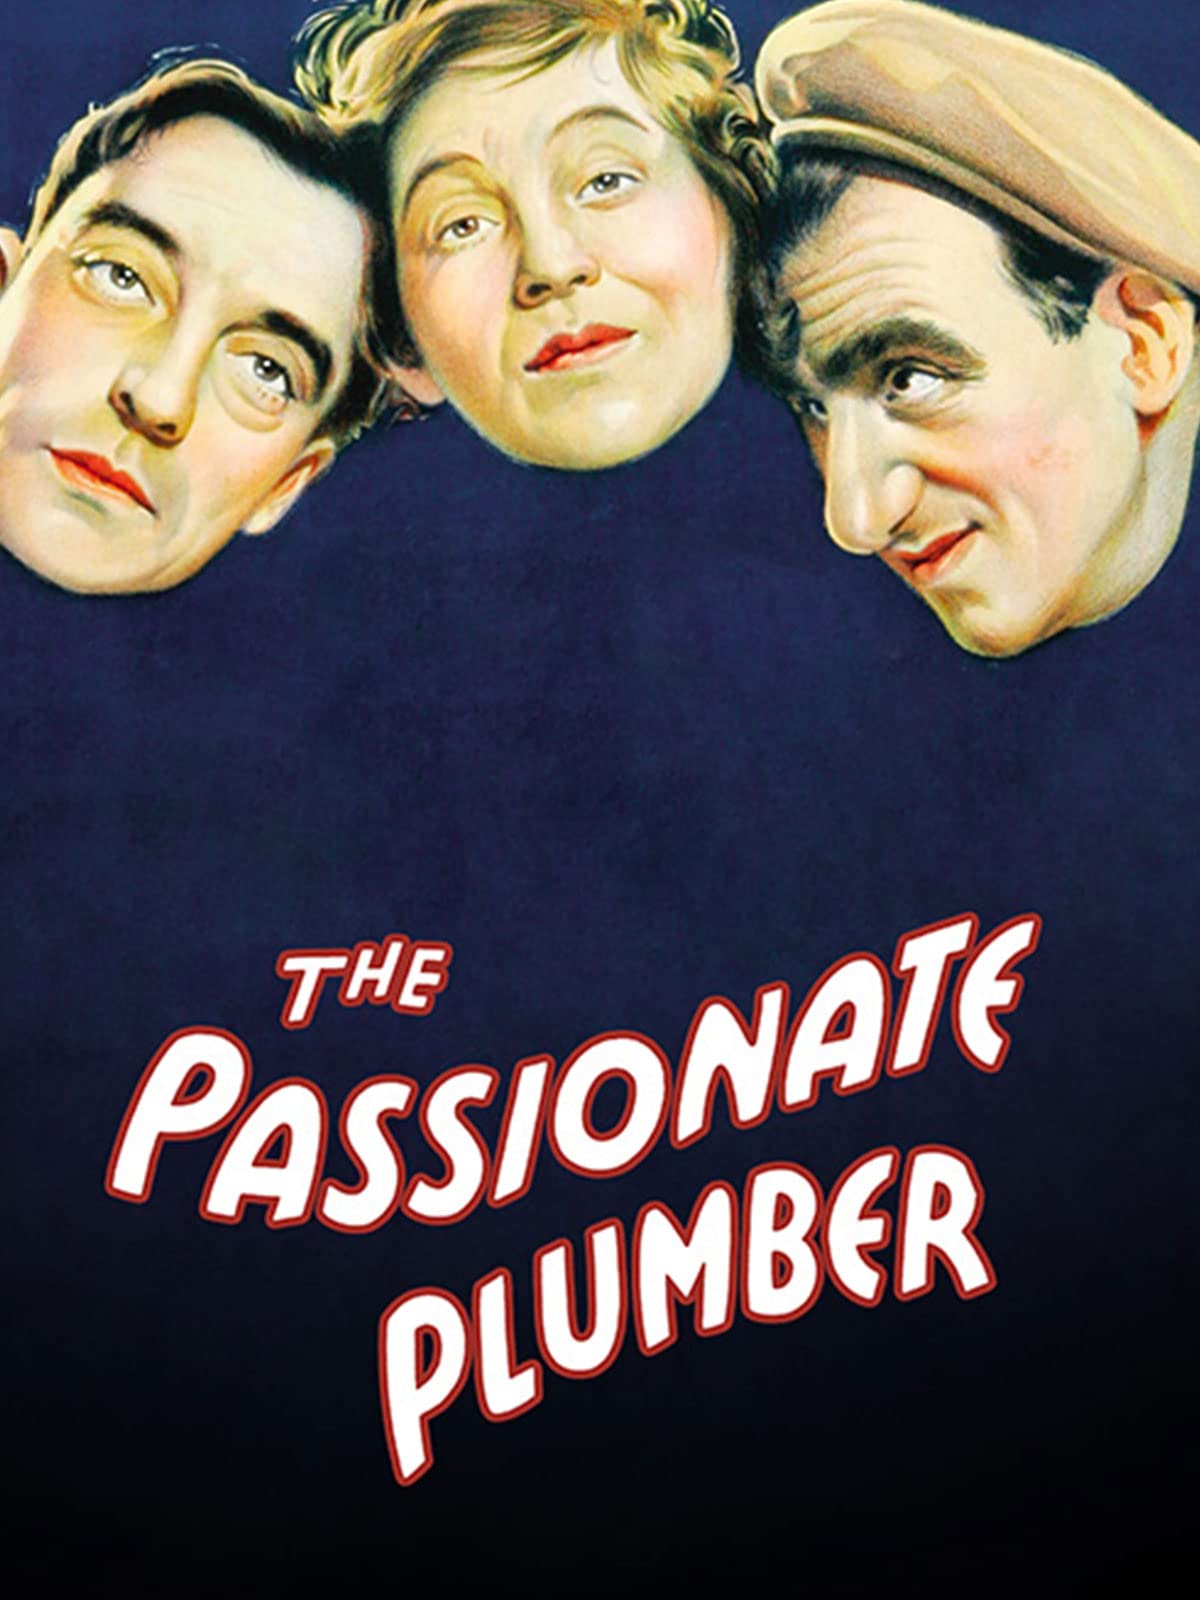 The Passionate Plumber - Famous Clowns